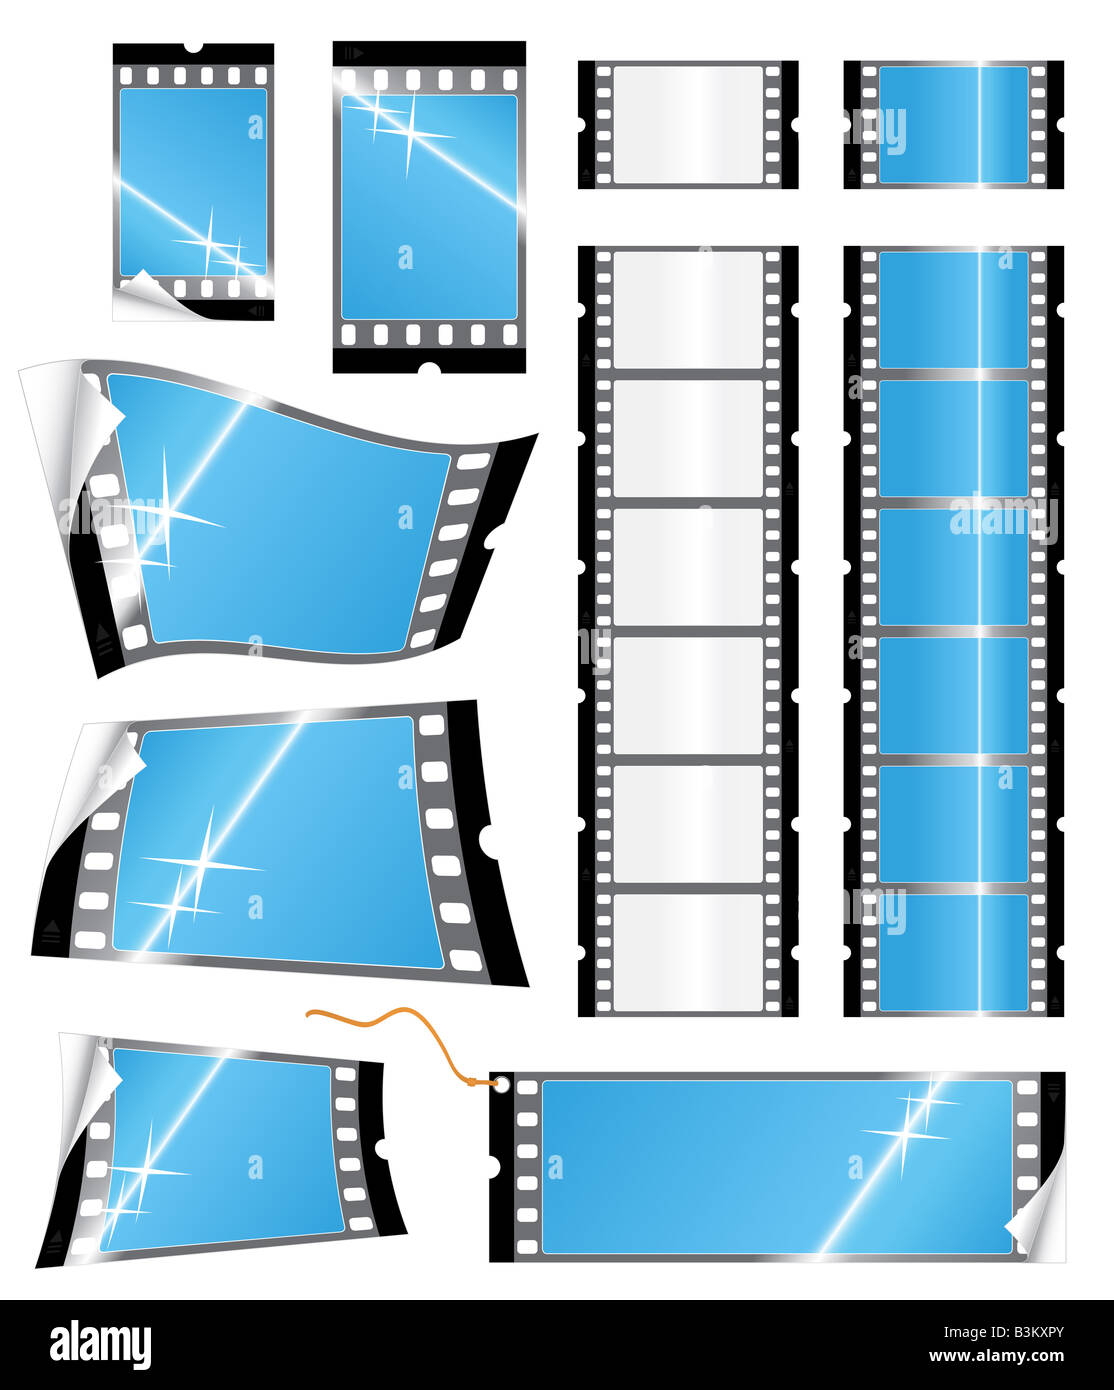 Vector illustration of various glossy stickers and tags or labels in the shape of a film strip Photography concept Stock Photo